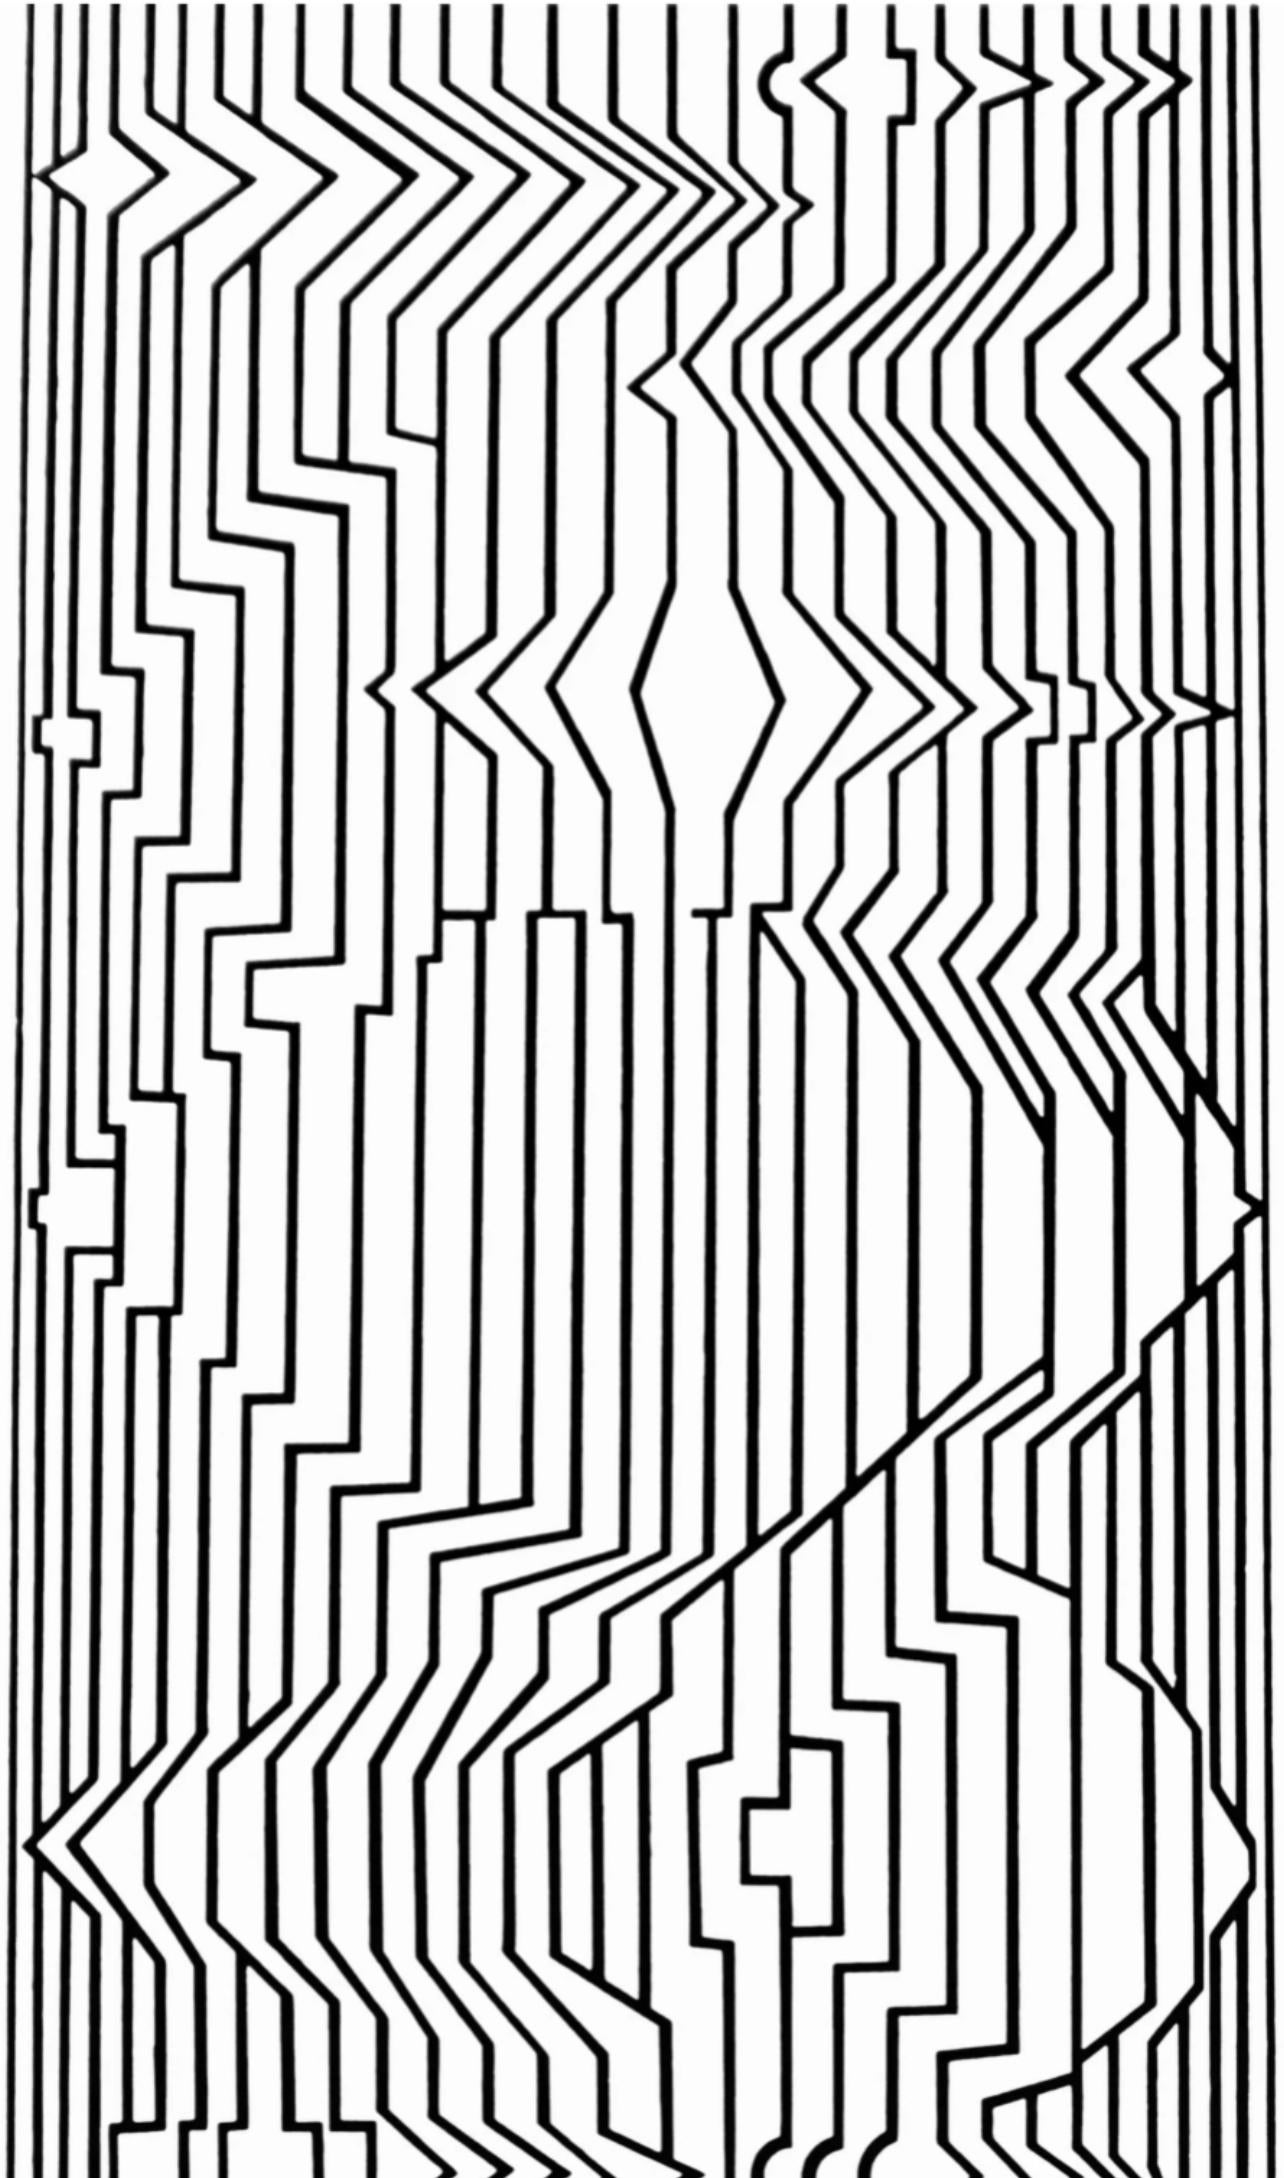 Victor Vasarely Abstract Print - Vasarely, Composition, Ondulatoires (after)